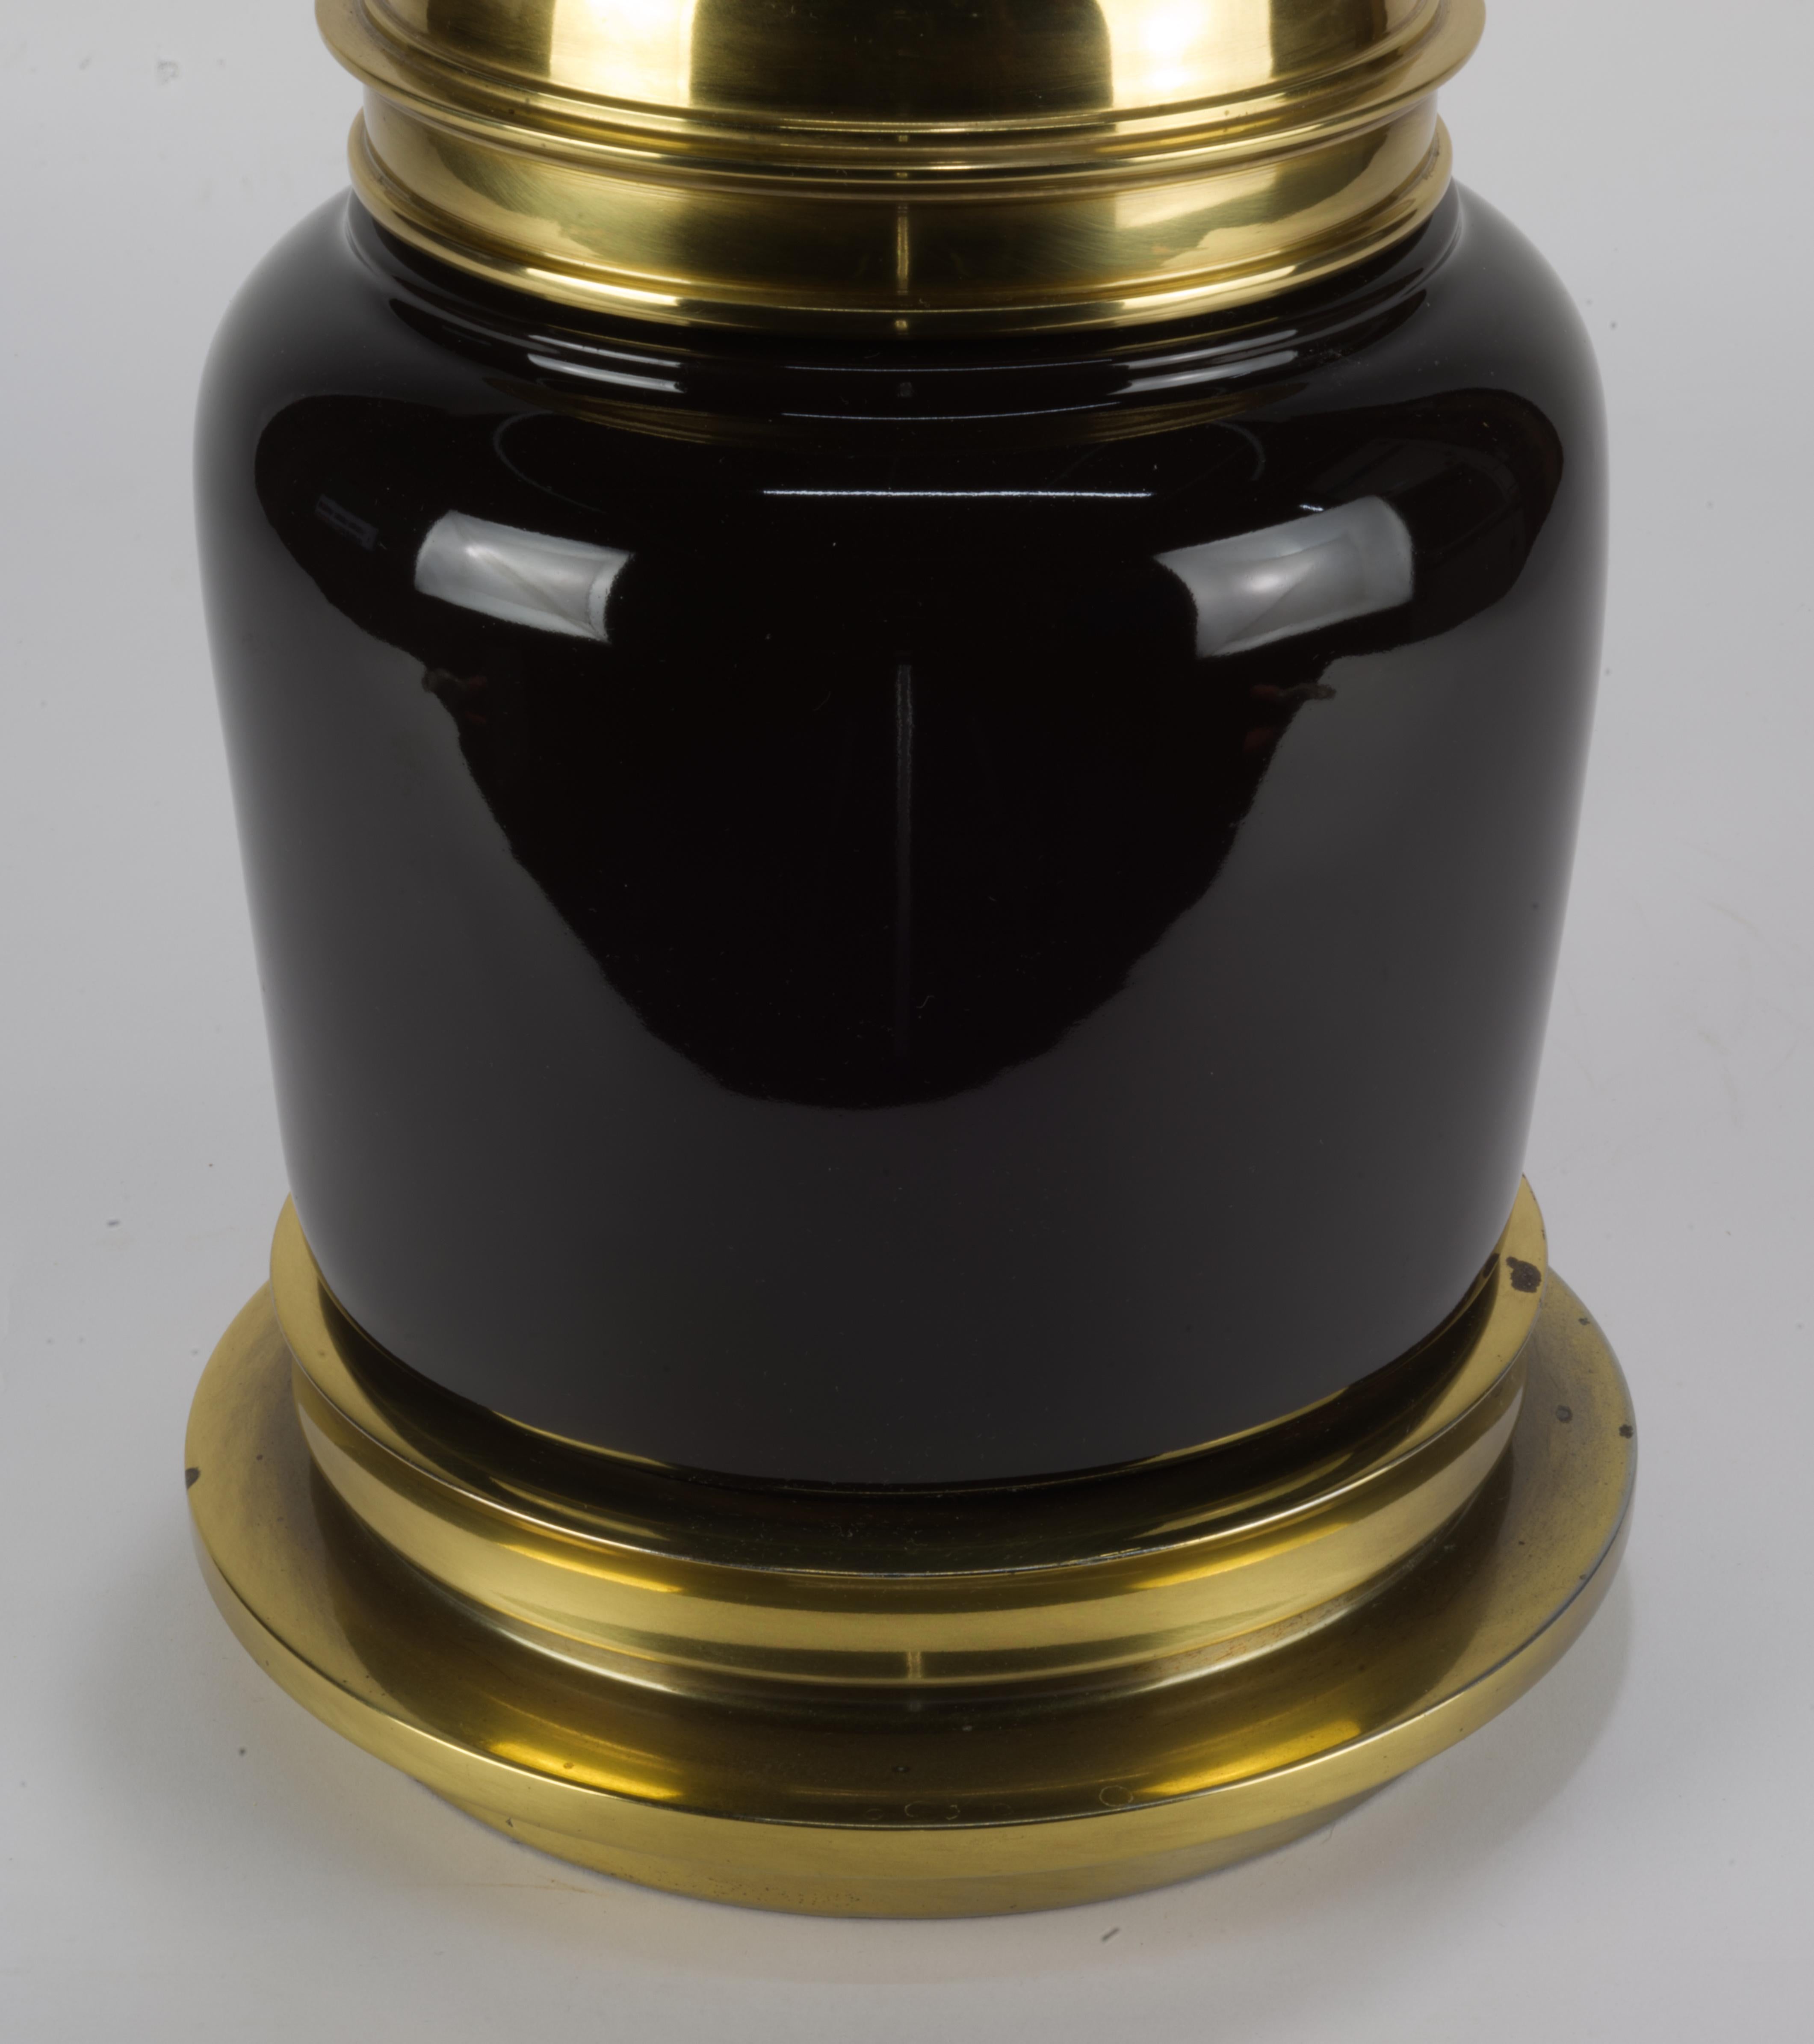 Stiffel Table Lamp, Black Ceramic and Brass, 1940s For Sale 1